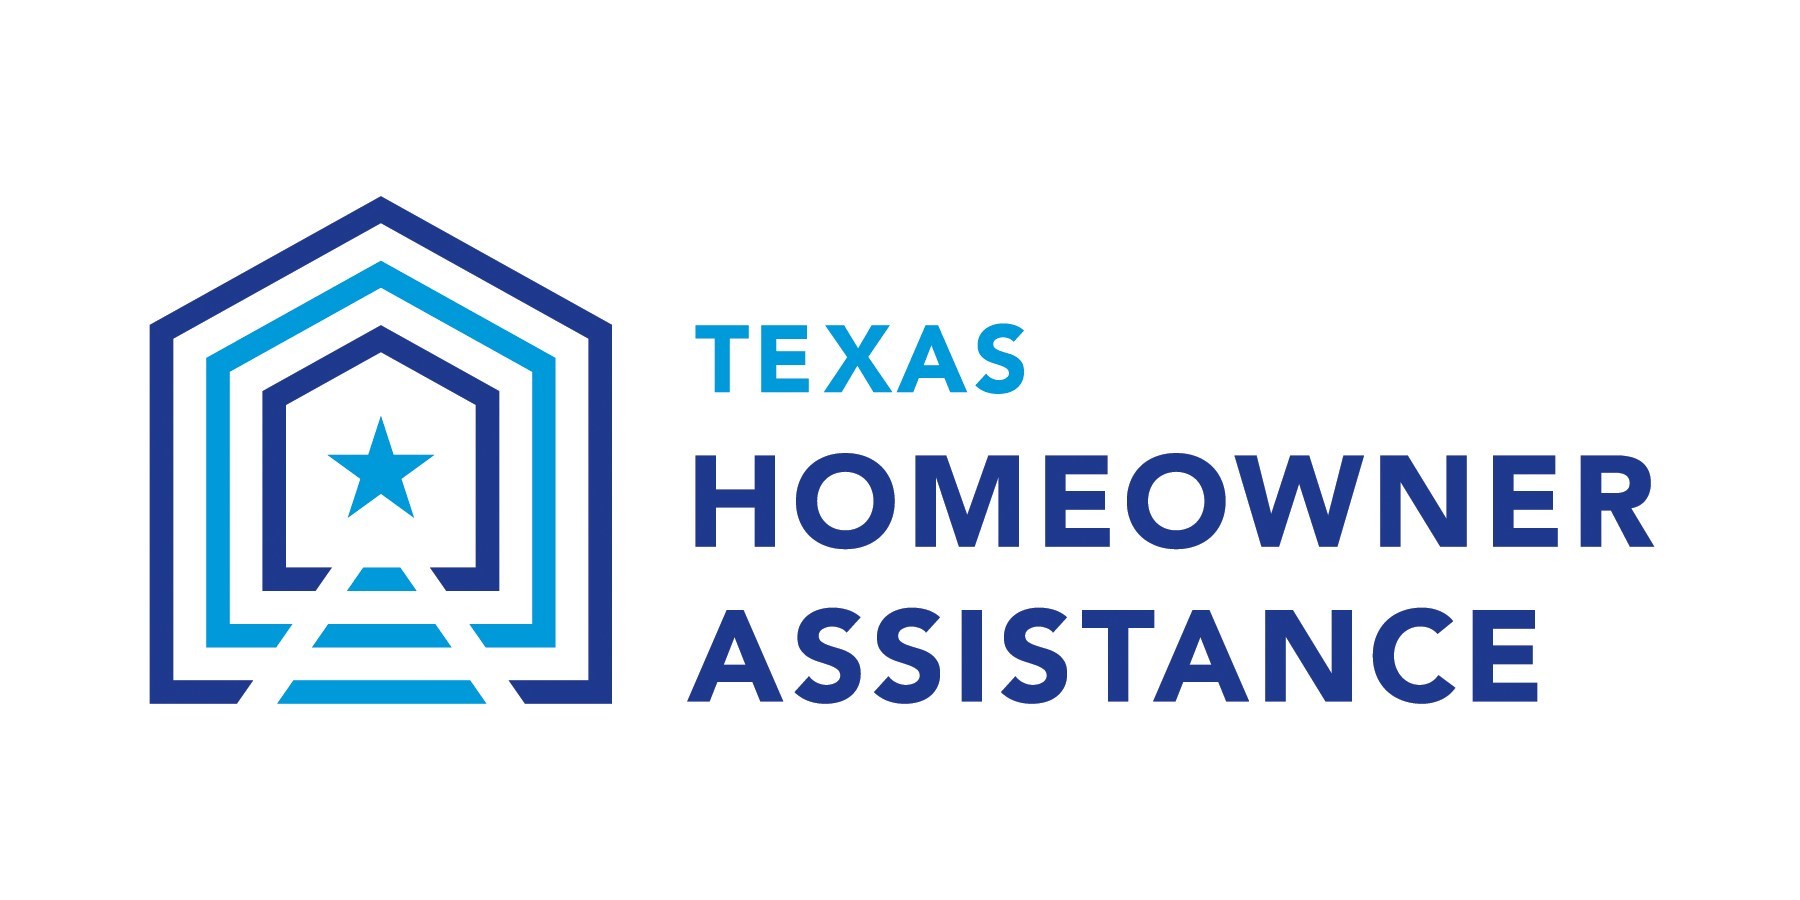 Texas Homeowner Assistance Fund Provides Free In-Person Help for ...